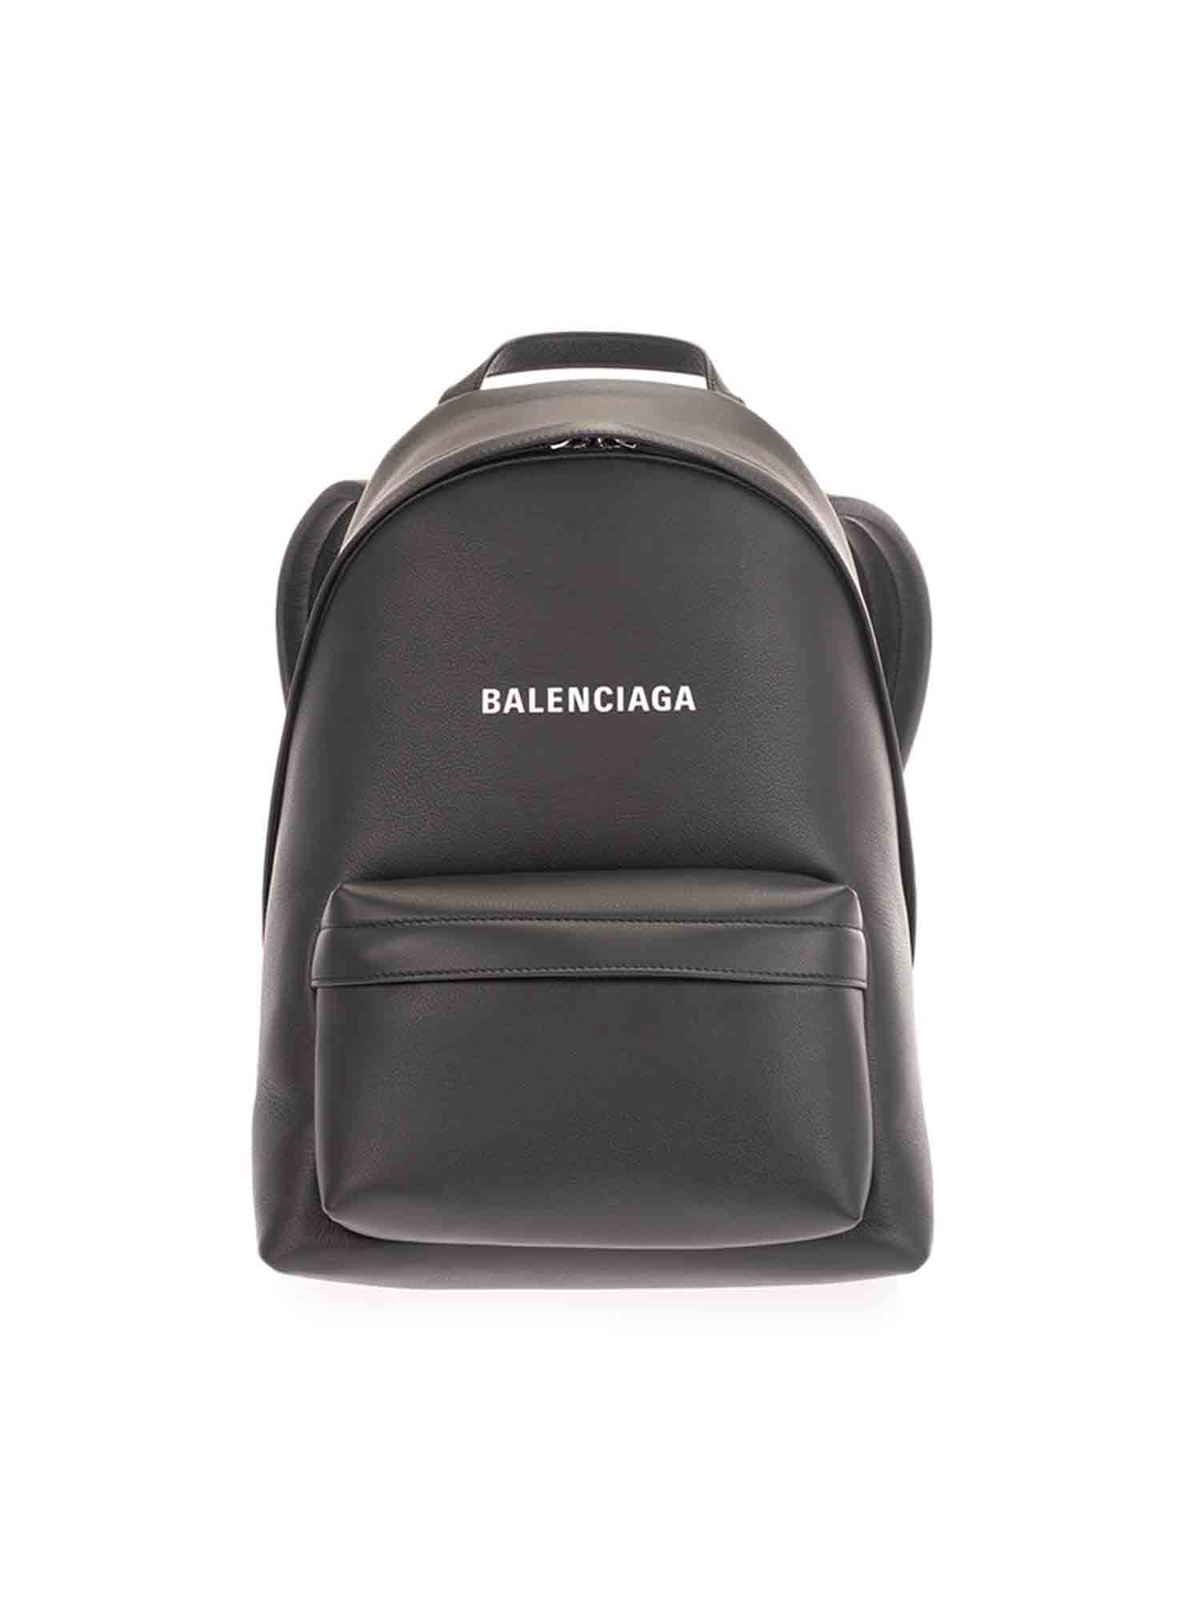 Backpacks Balenciaga - Leather Everyday small ackpack - 552379DLQ4N1000